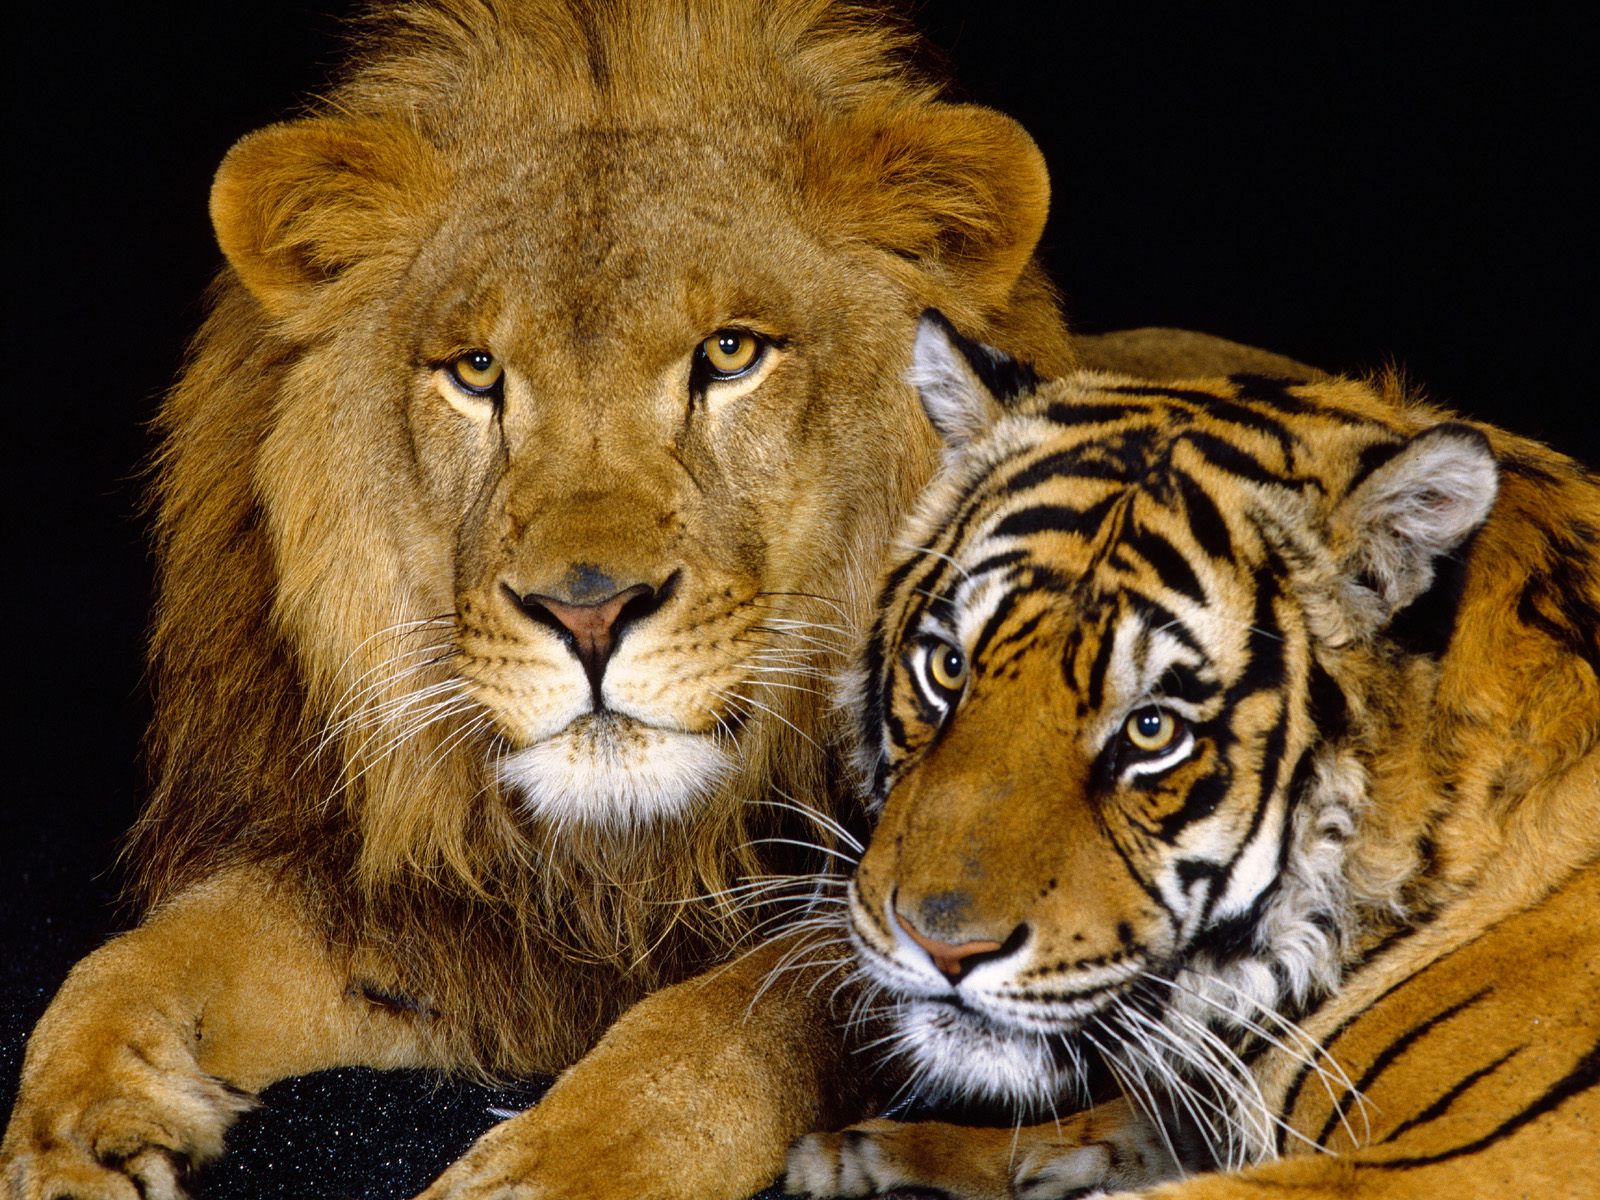 Adult Lions Wallpaper Lion And Tiger